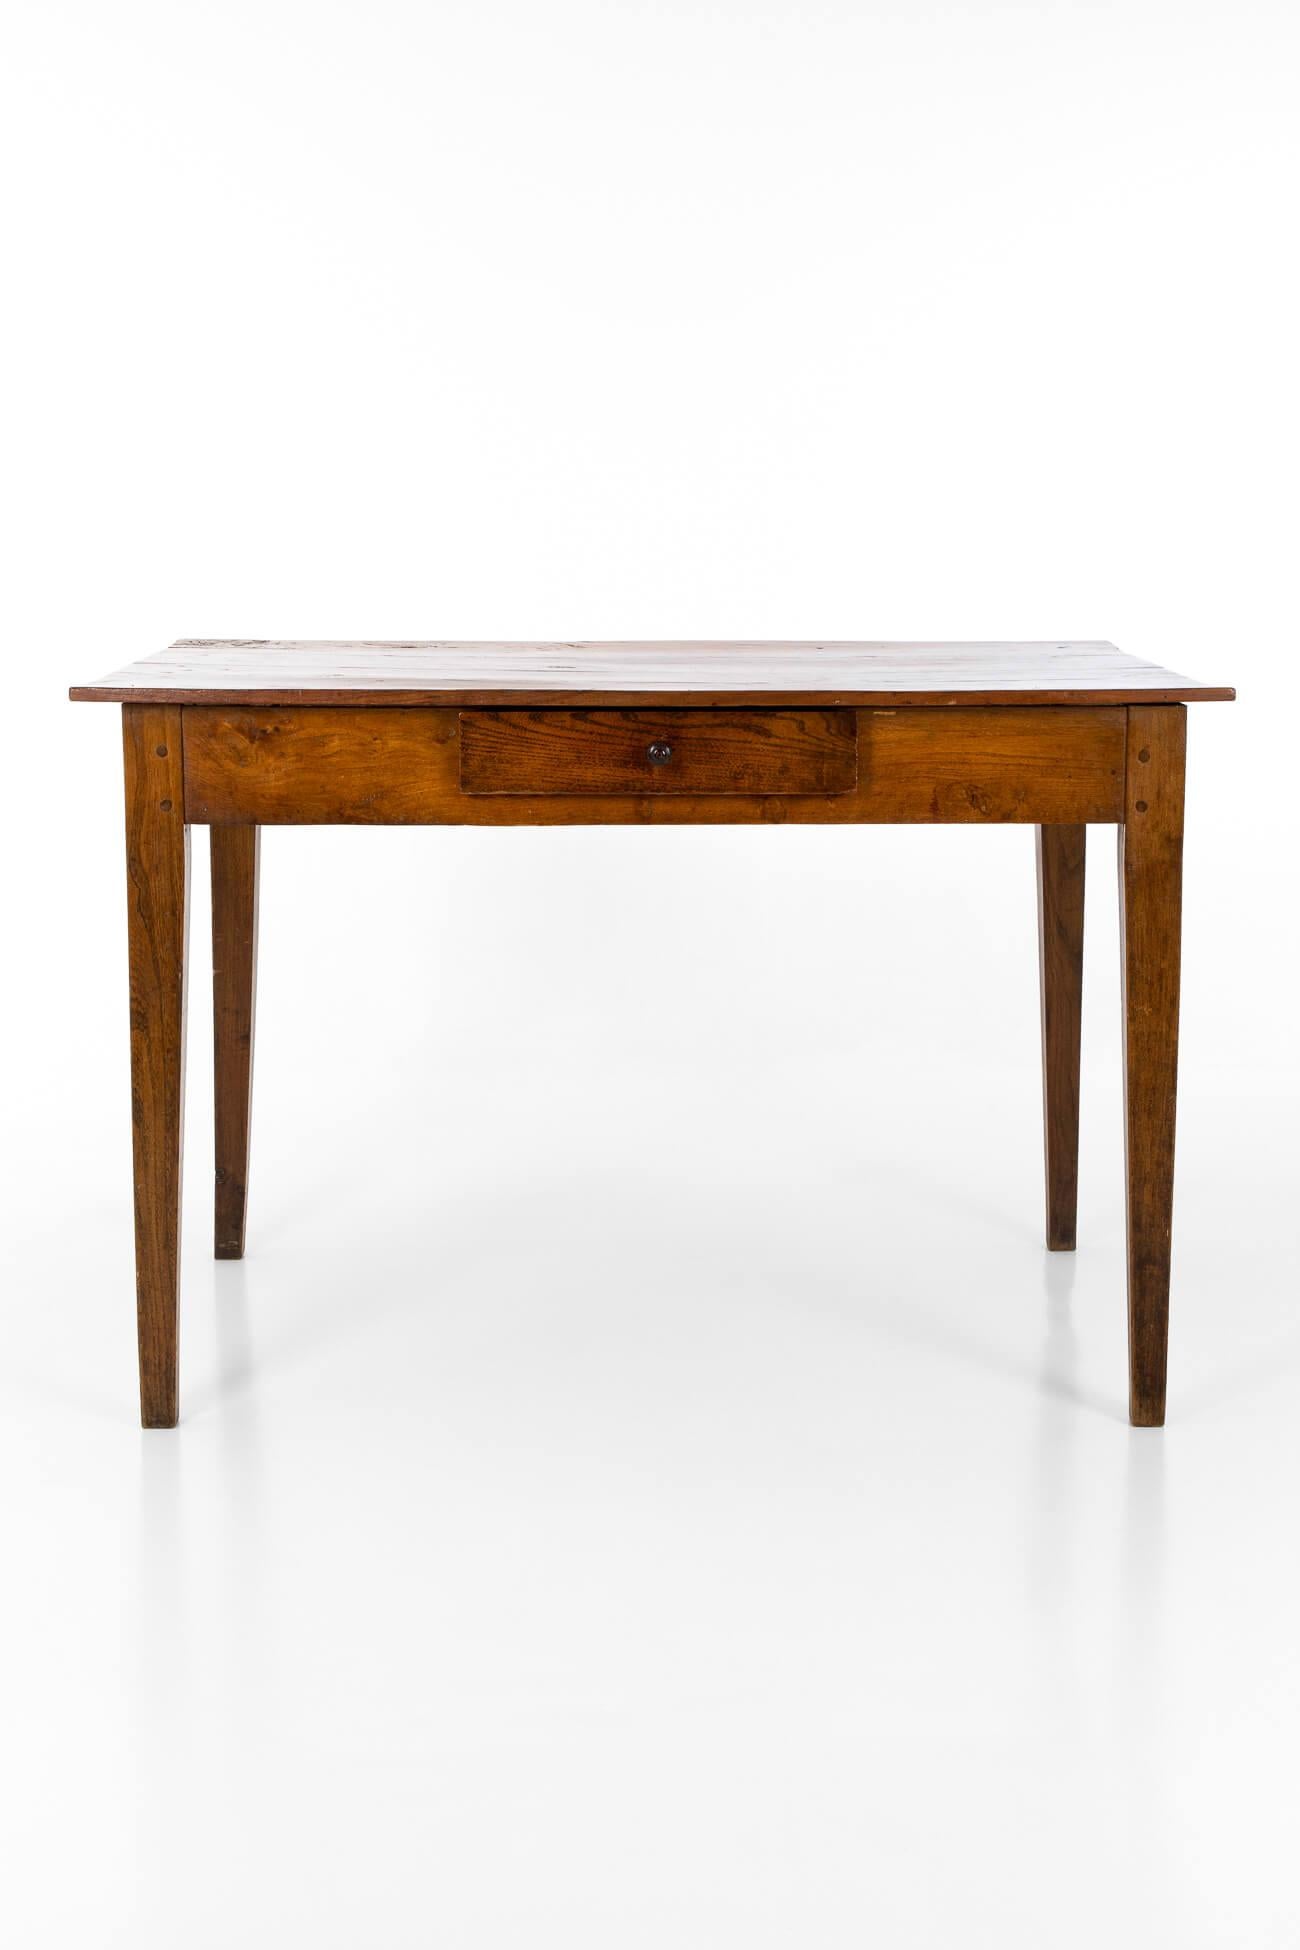 19th Century French Fruitwood Table For Sale